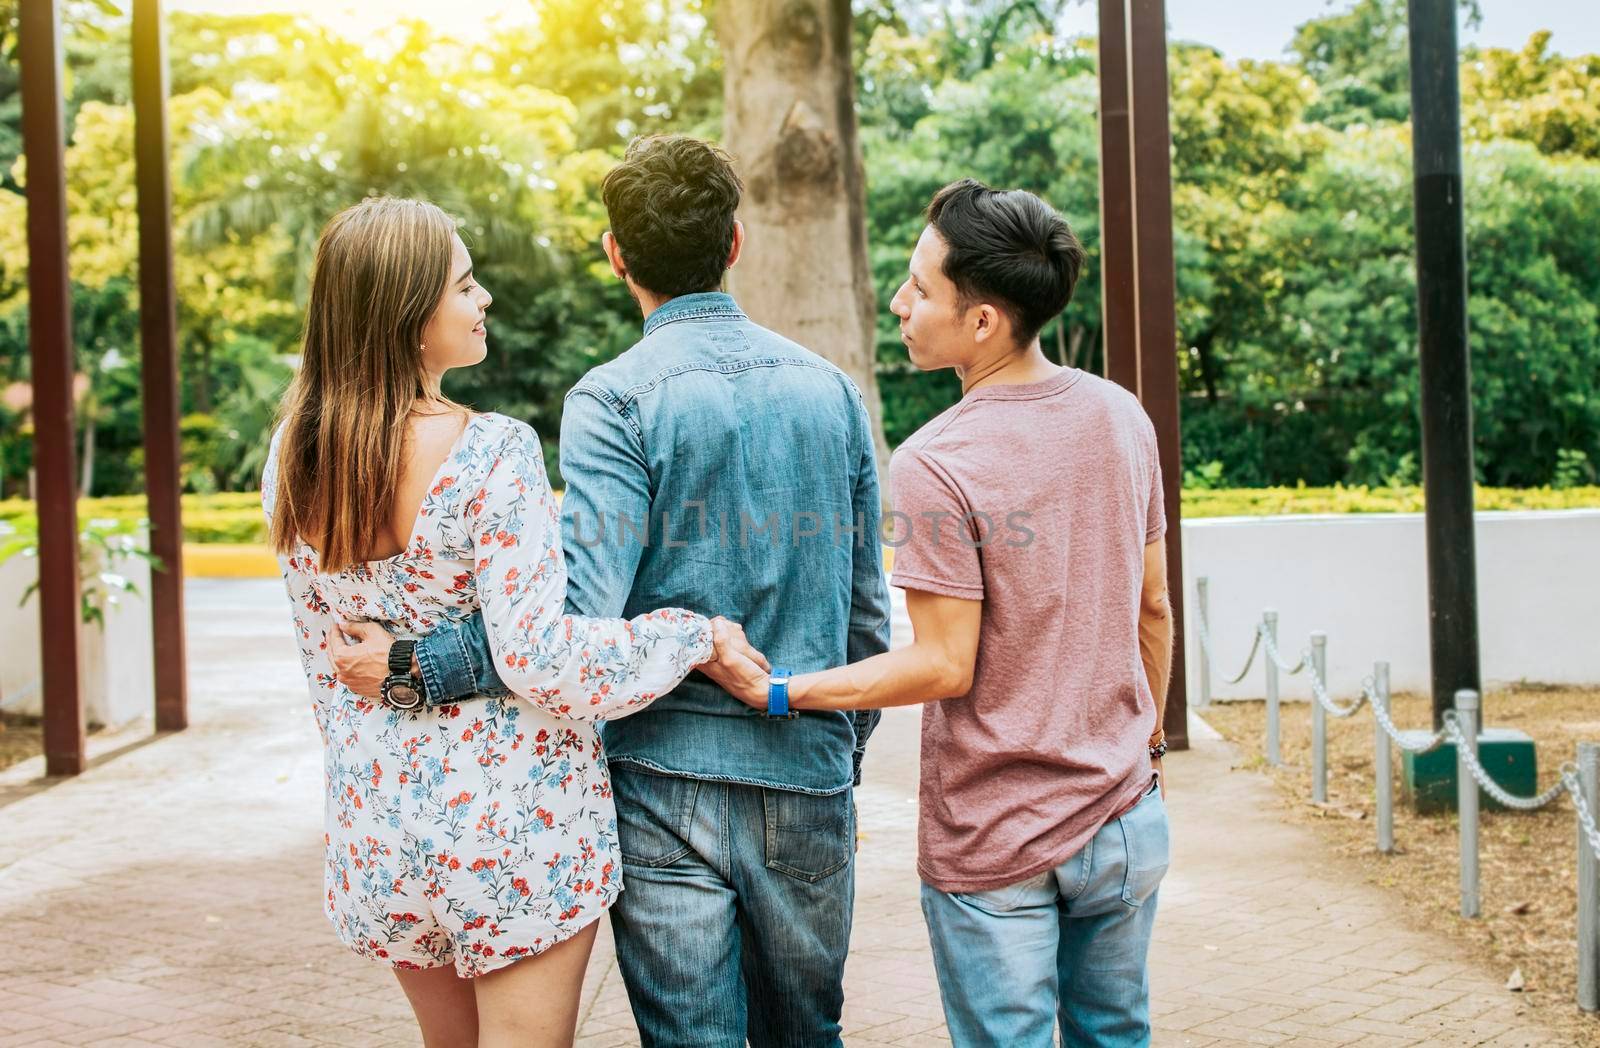 Unfaithful girl walking in the park with her boyfriend while holding another man hand. Love triangle concept. Woman holding hands with another man while walking with her boyfriend outdoor by isaiphoto